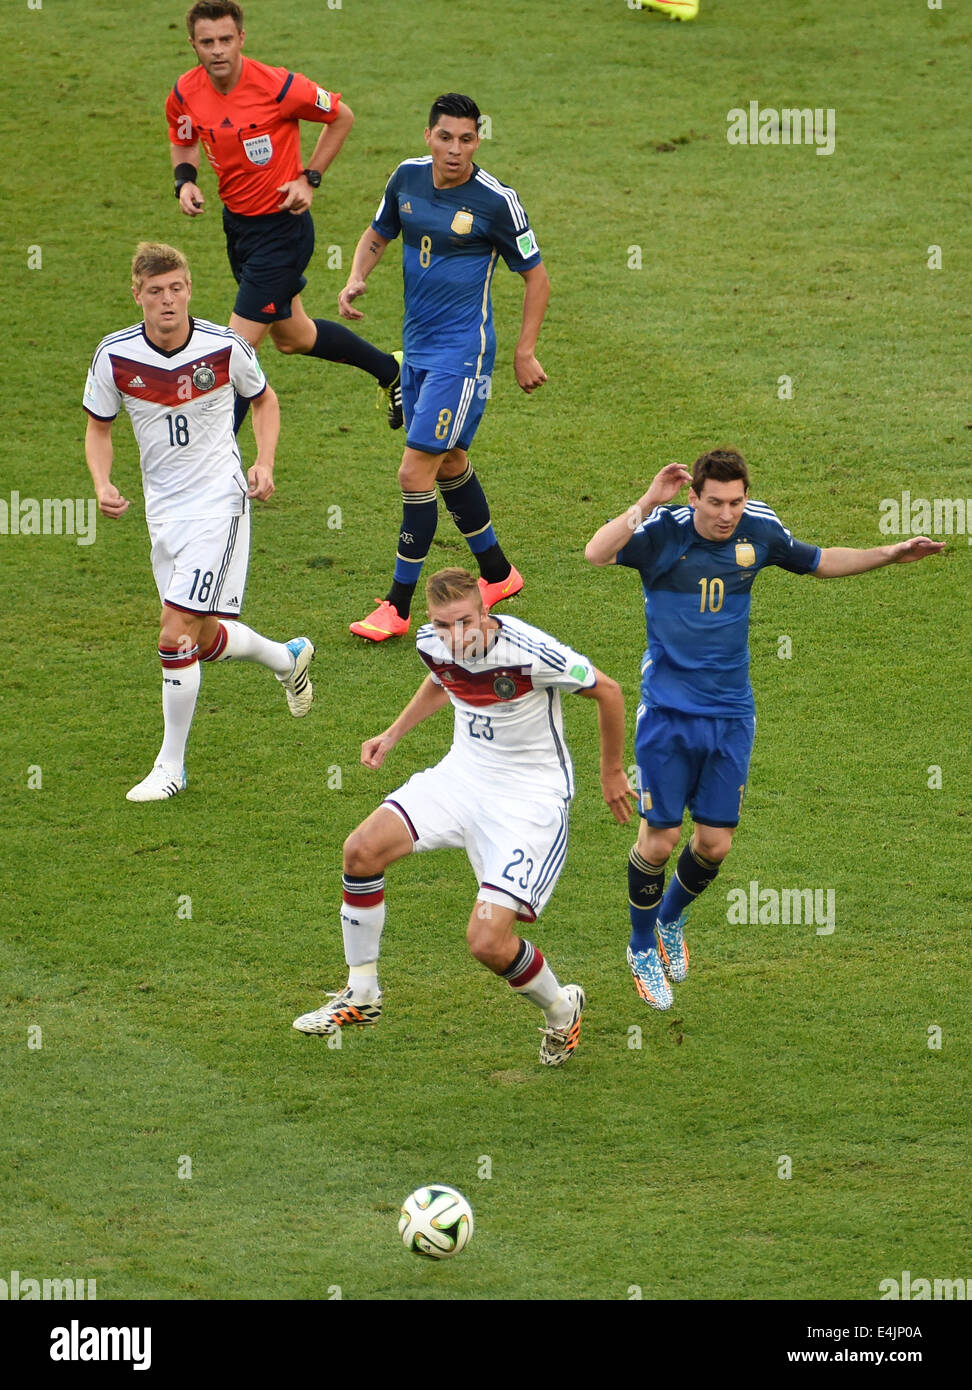 Rio de Janeiro, Brazil. 13th July, 2014. Christoph Kramer (front L), Toni Kroos (L) of Germany and Lionel Messi (front R), Enzo Perez (R) of Argentina vie for the ball next to Italian referee Nicola Rizzoli (top) during the FIFA World Cup 2014 final soccer match between Germany and Argentina at the Estadio do Maracana in Rio de Janeiro, Brazil, 13 July 2014. Photo: Thomas Eisenhuth/dpa/Alamy Live News Stock Photo